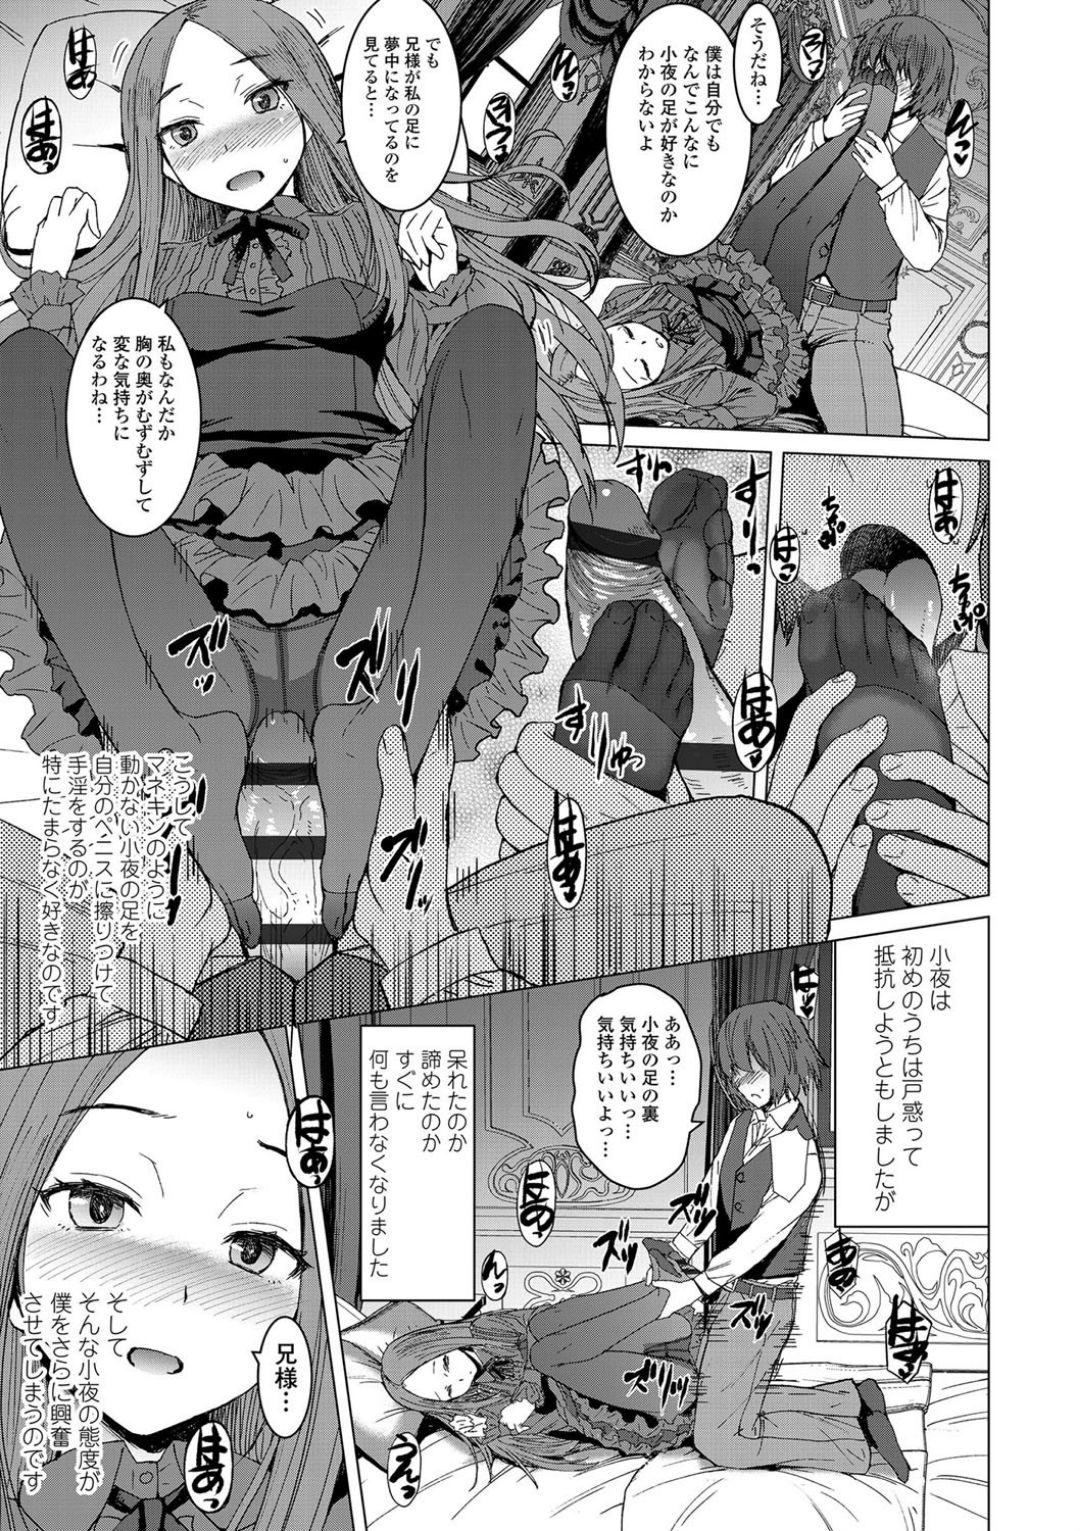 Puto Aisarete Miru? - Do you want to be dominated? Sex Party - Page 7